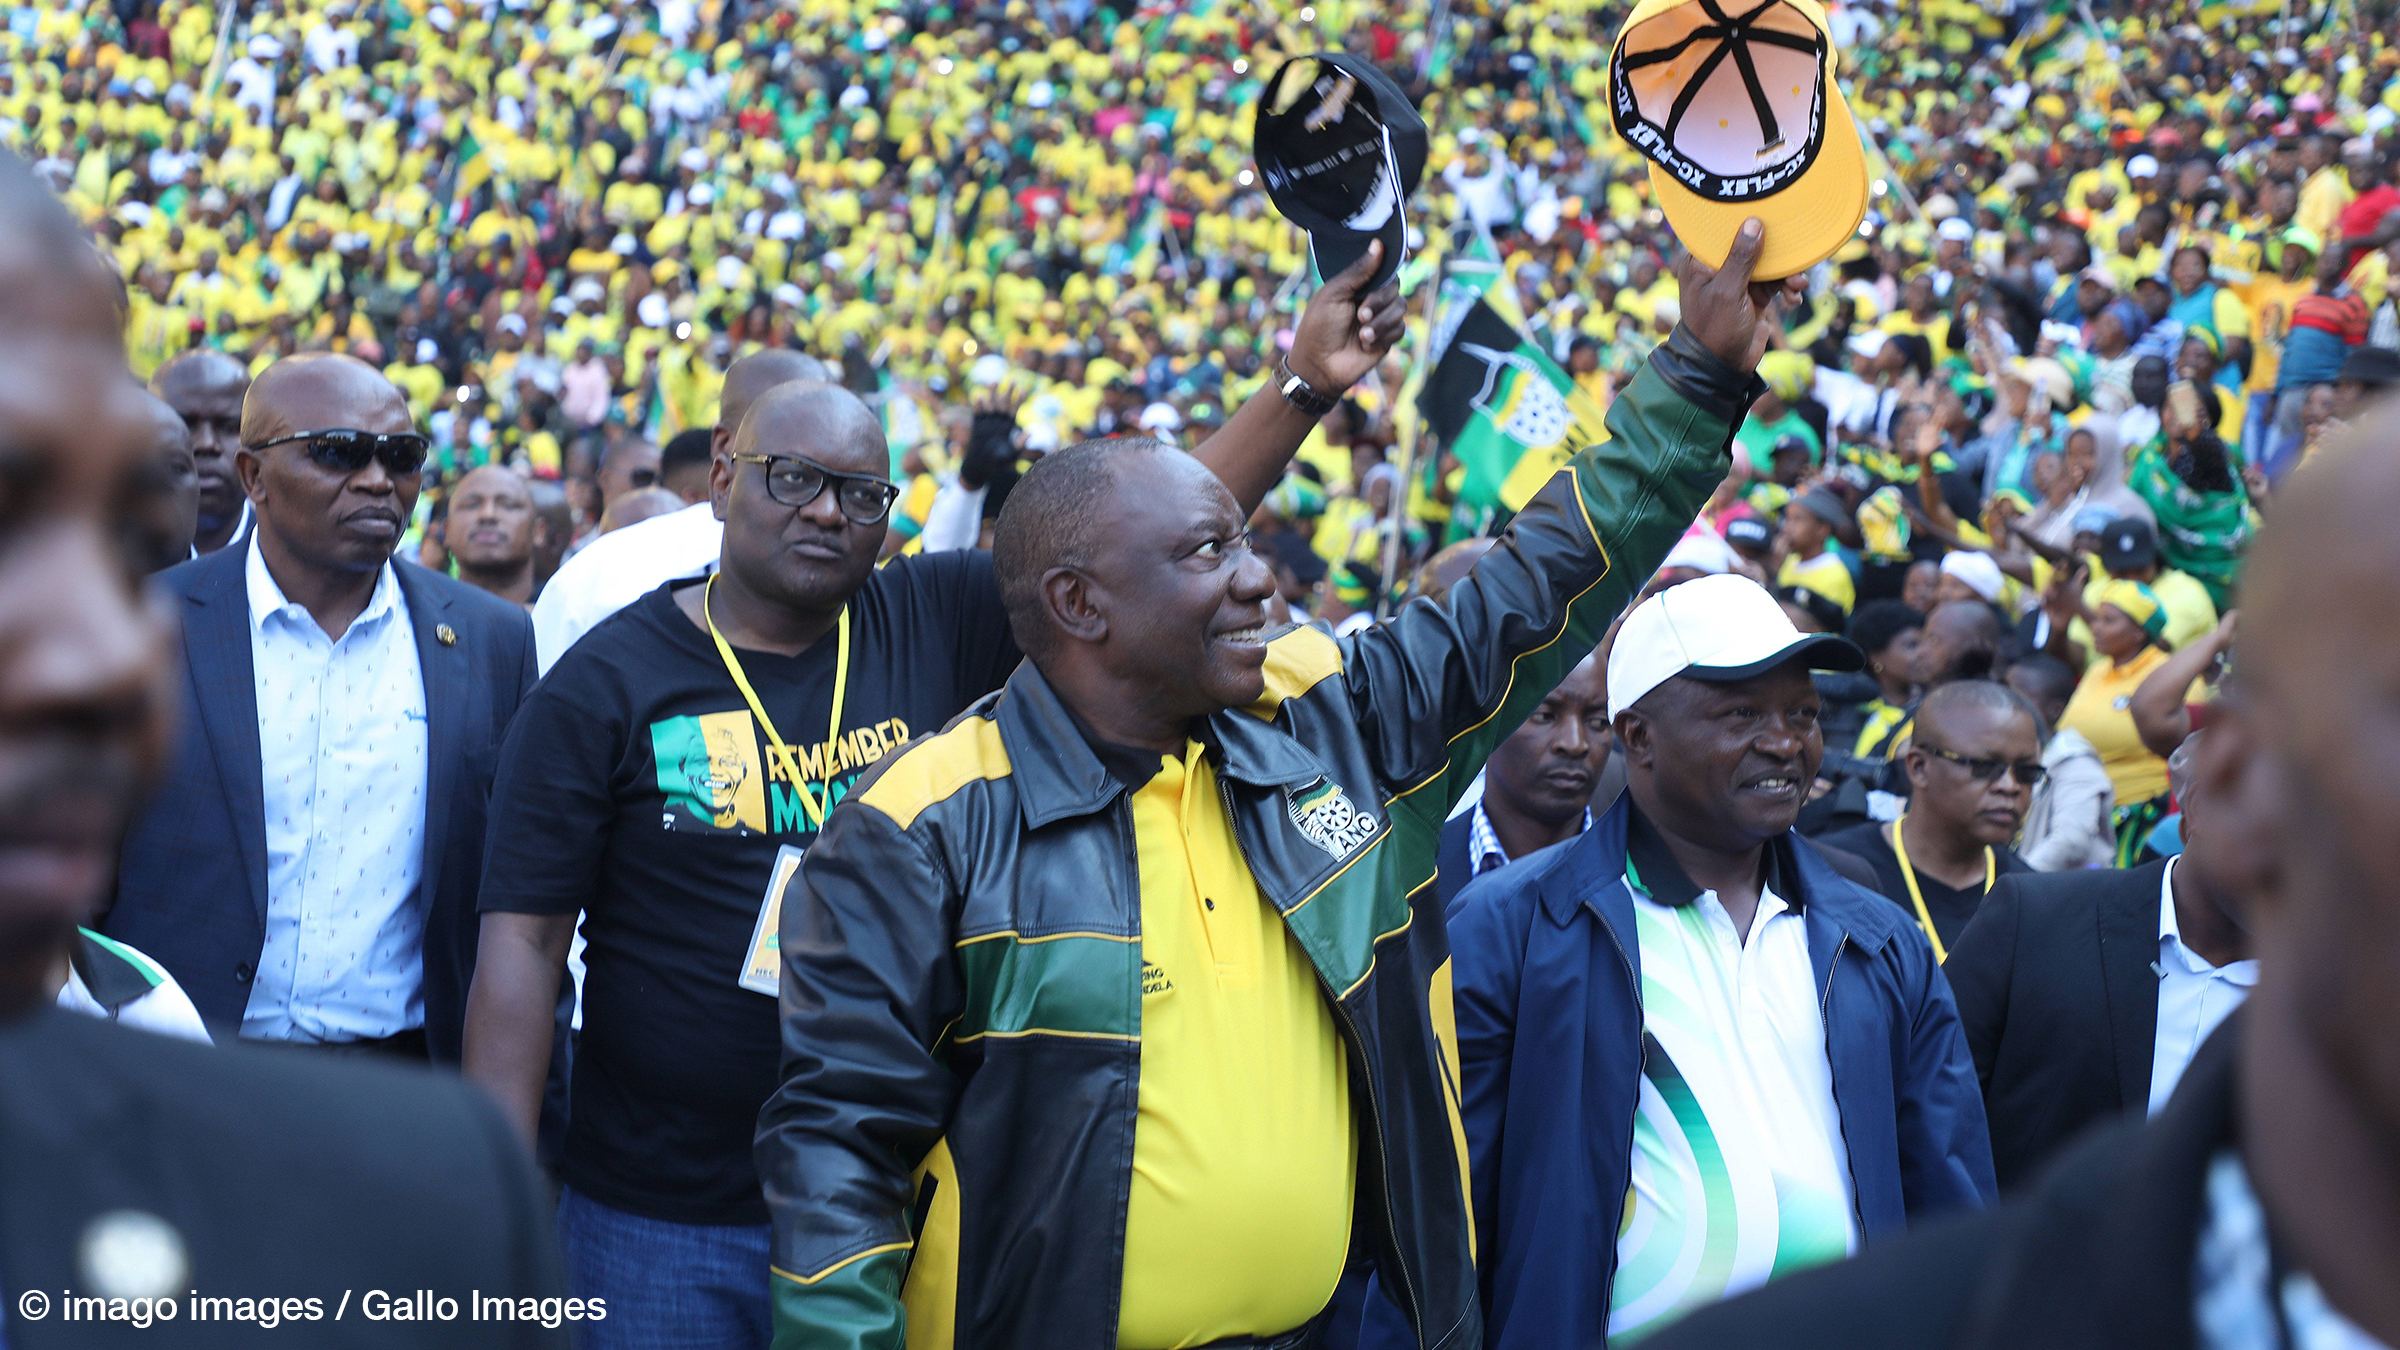 ANC Siyanqoba rally May 5, 2019. ANC president Cyril Ramaphosa greets ANC supporters at a fully packed Ellis Park stadium in Doornfontein, Johannesburg during the party s Siyanqoba Rally ahead of the national elections on May 8.